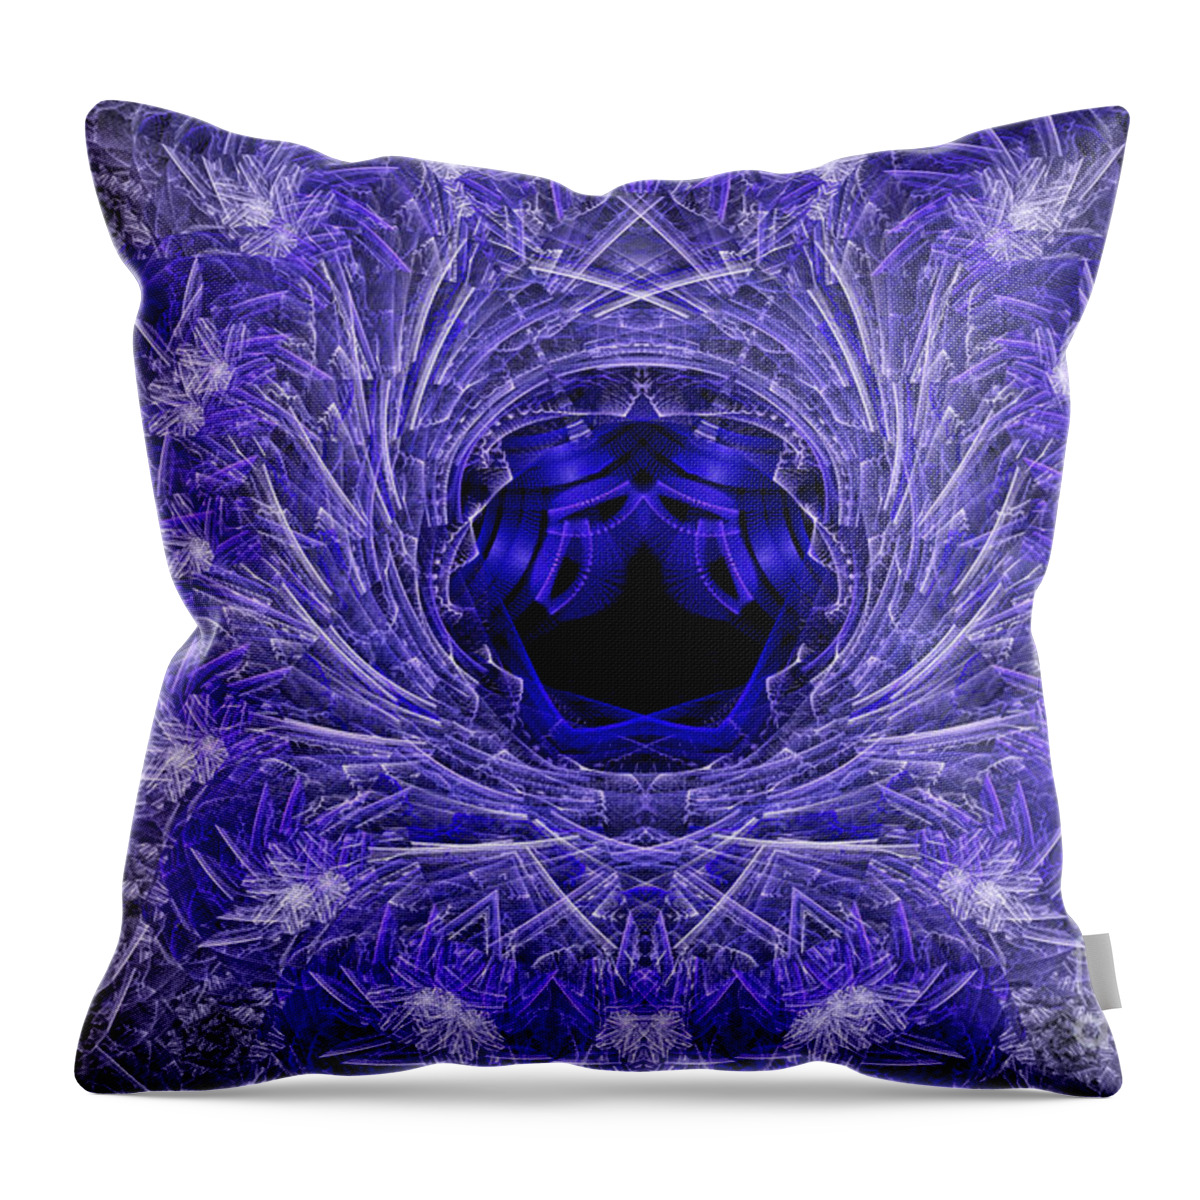 Jwildfire Throw Pillow featuring the digital art Blue Ice by Melissa Messick